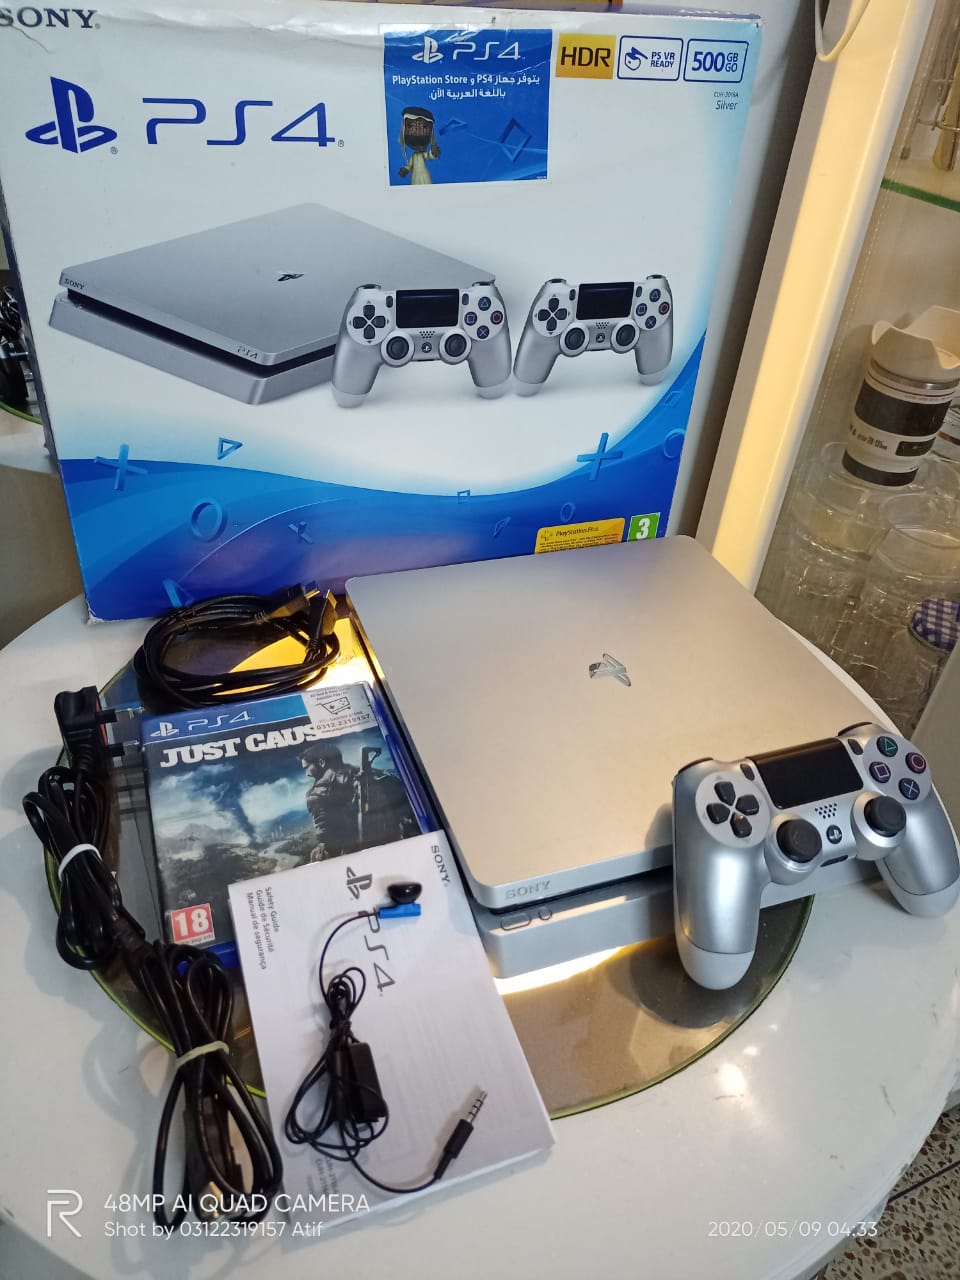 used ps4 in store